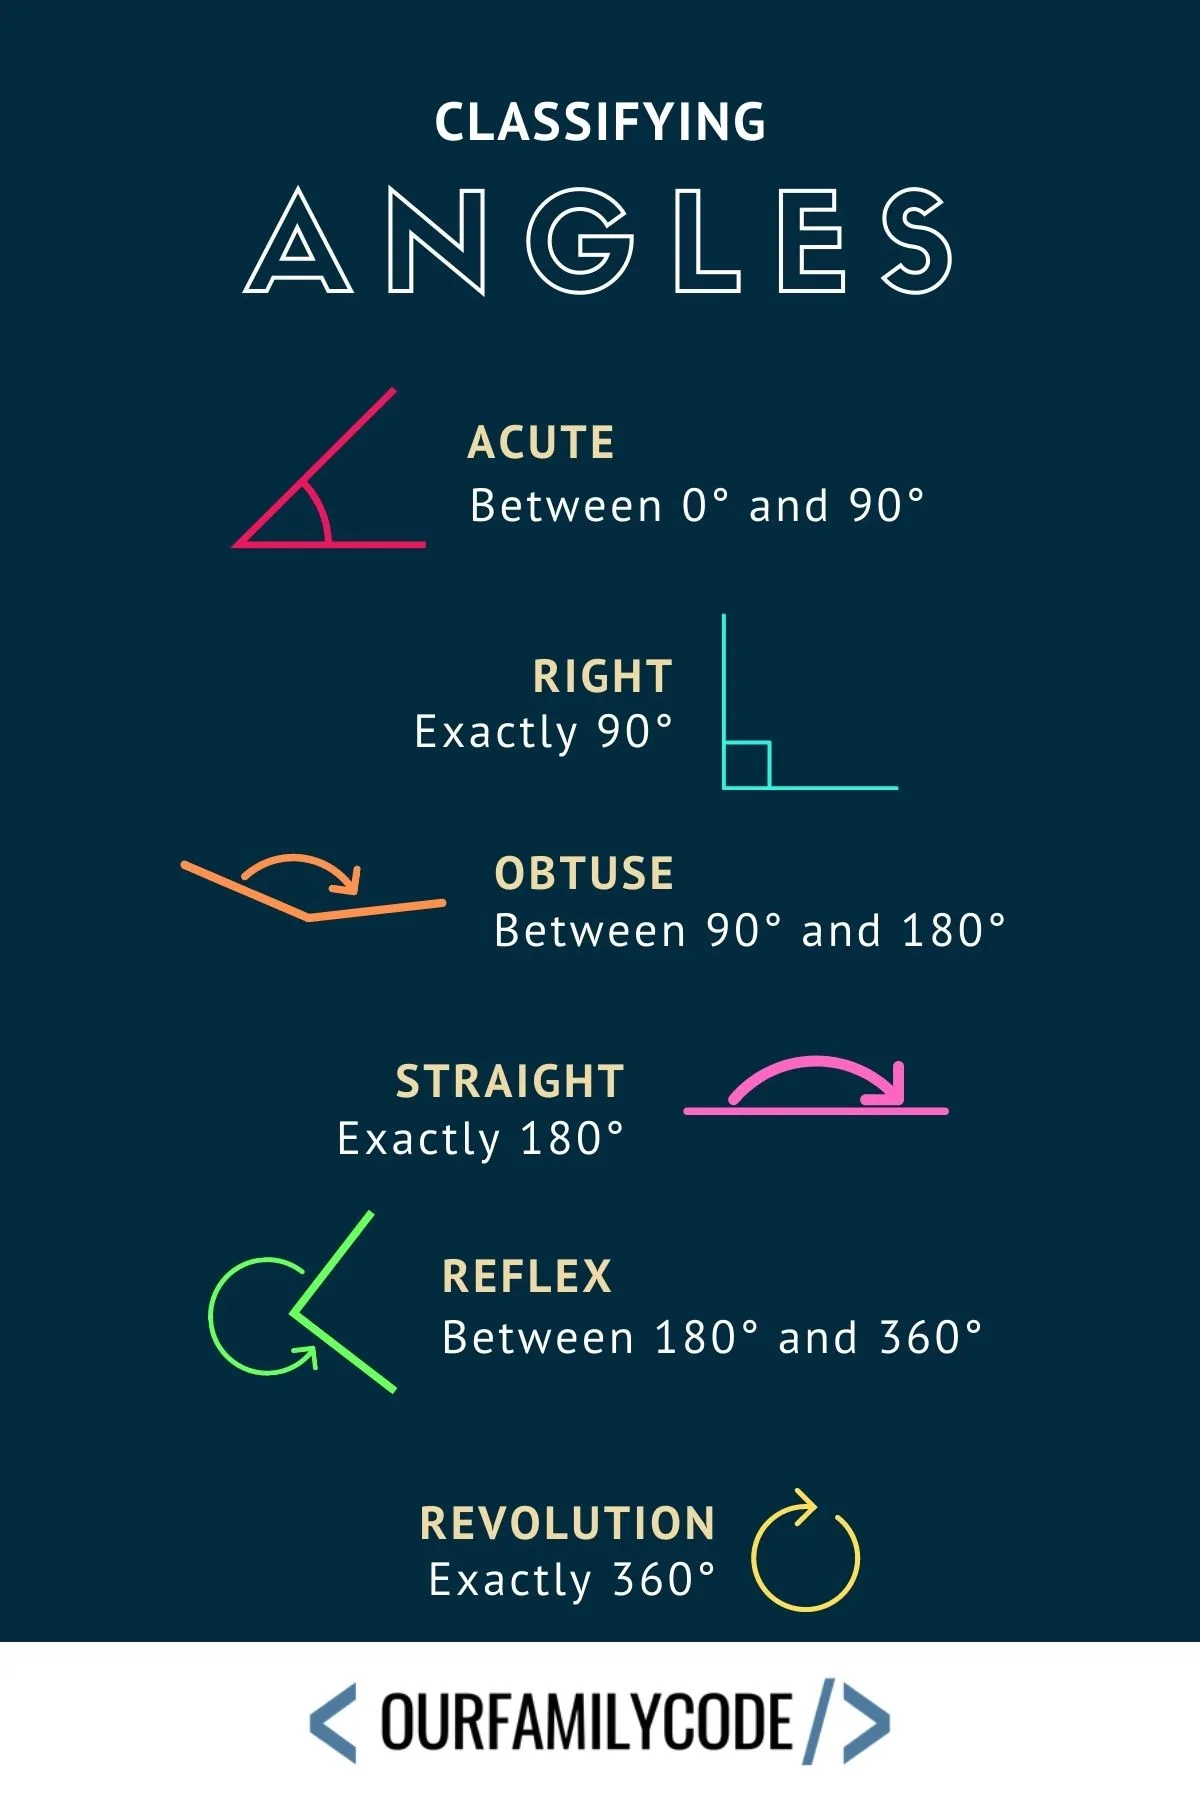 An infographic that shows types of angles with classifying degree information.